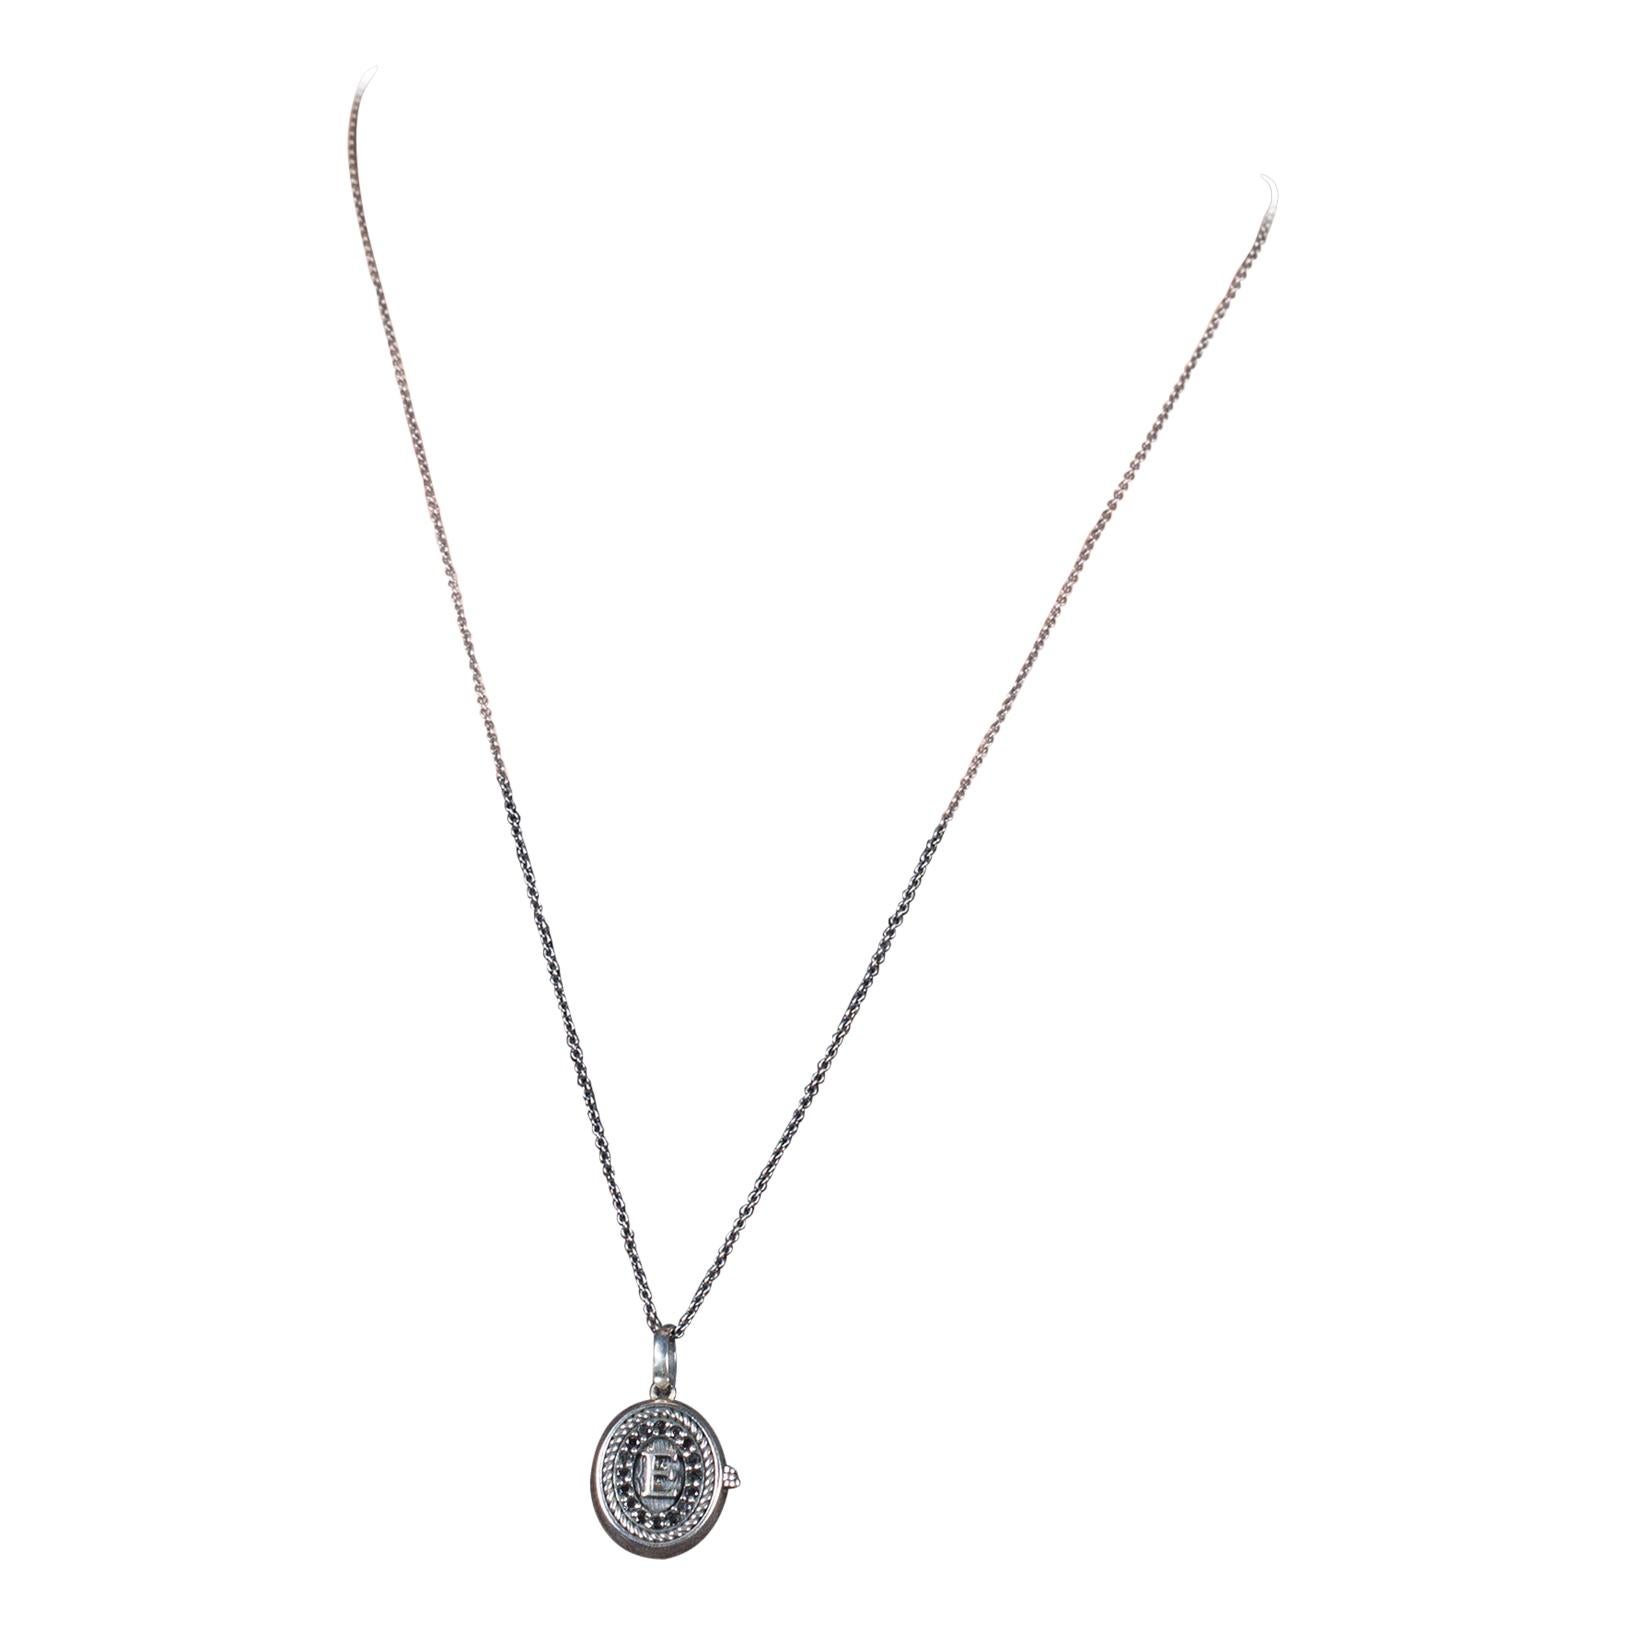 Silver Locket Pendant with initials and Black Diamond Pavè from IOSSELLIANI For Sale